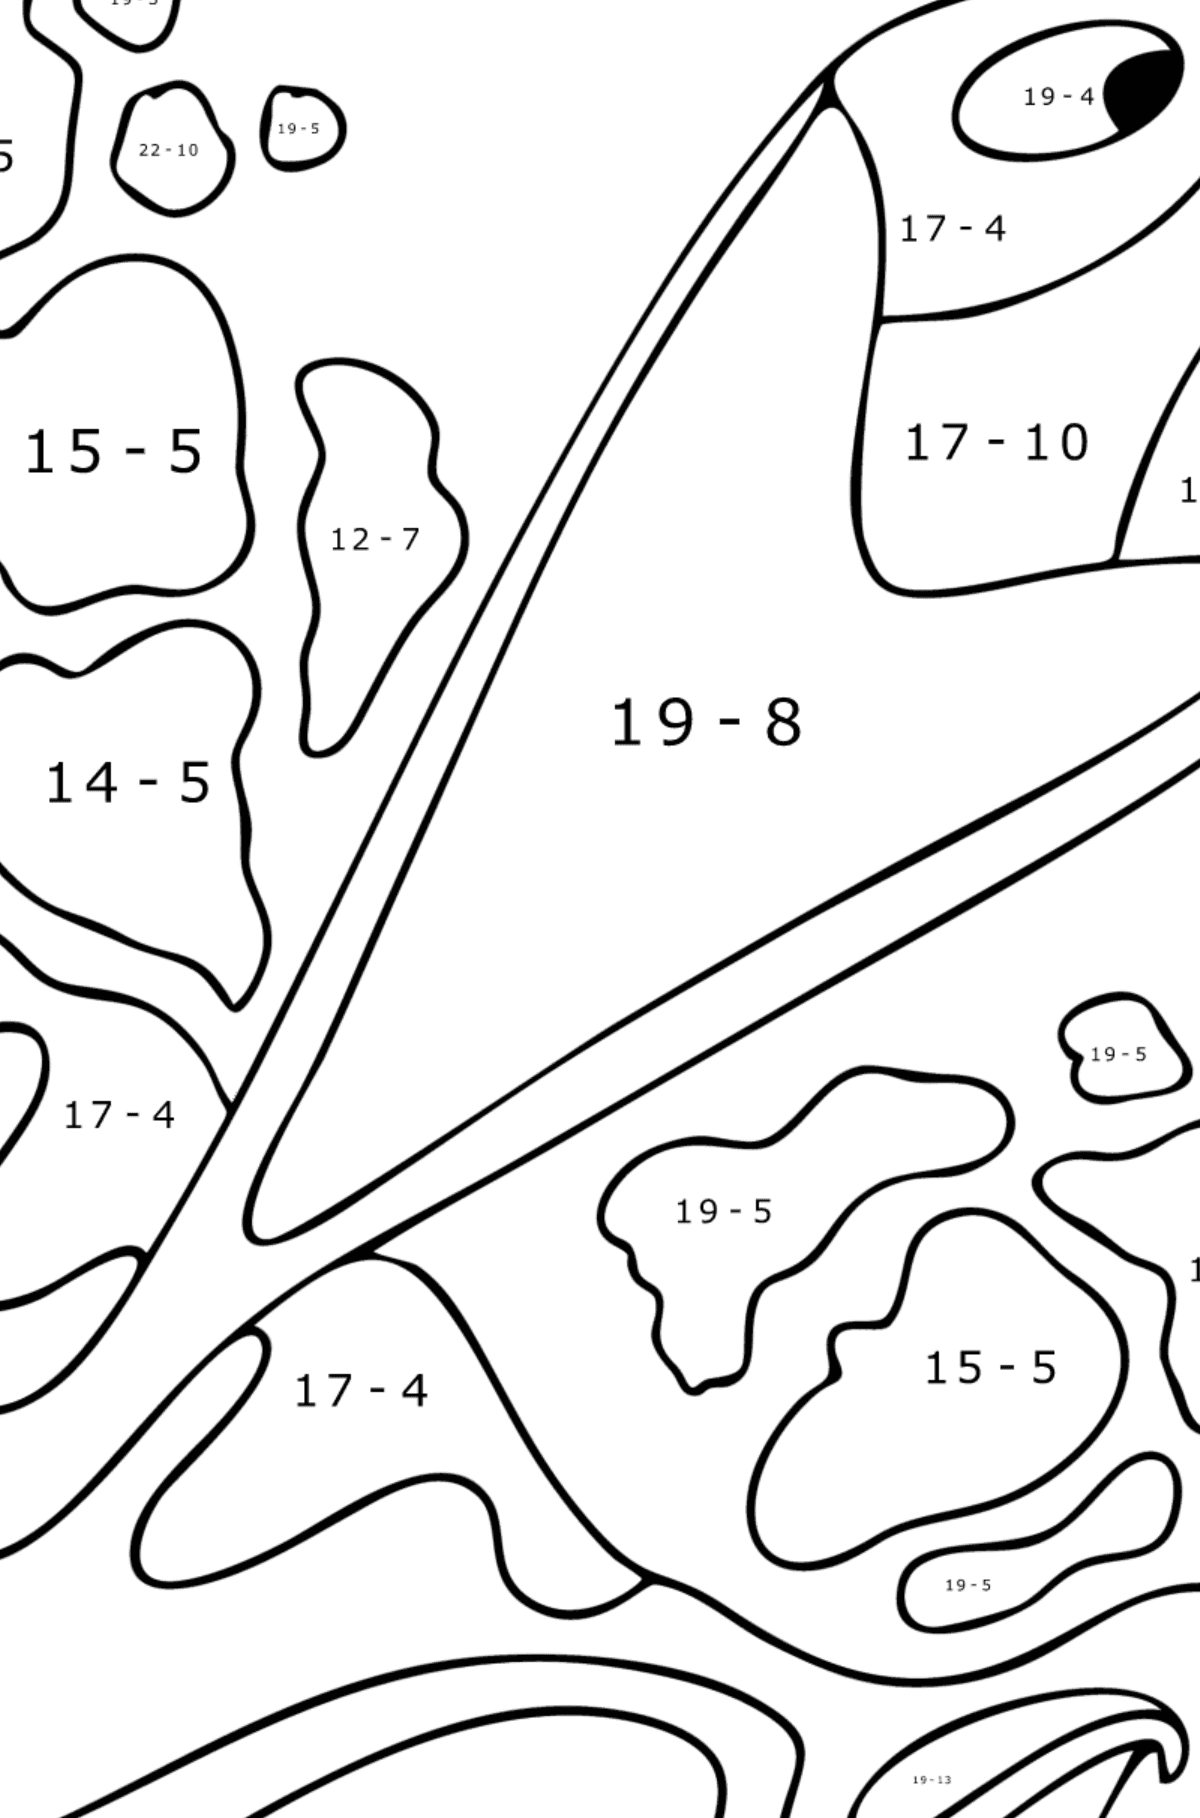 Electric Stingray coloring page - Math Coloring - Subtraction for Kids